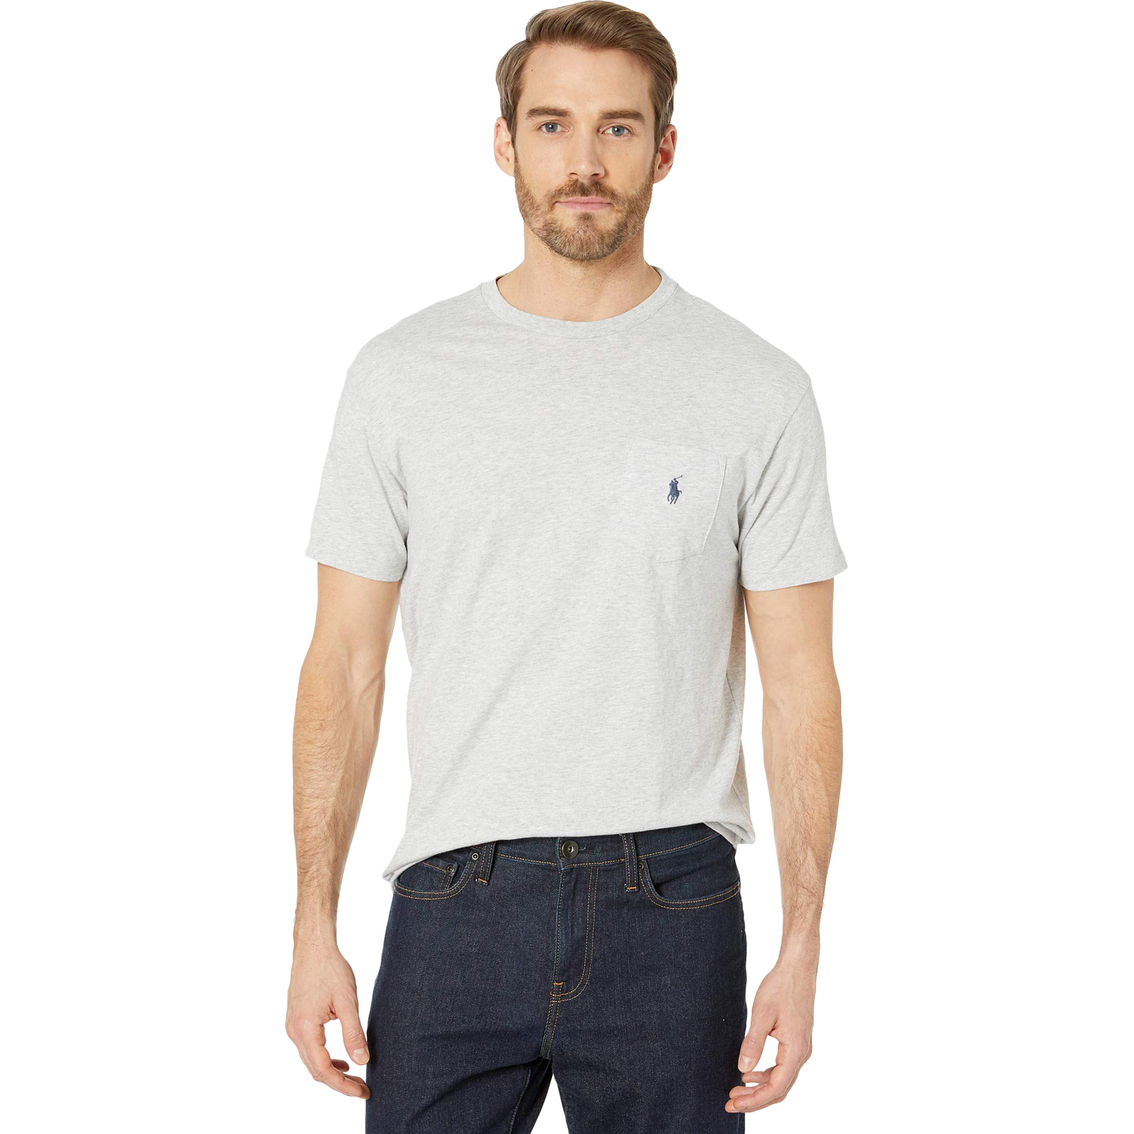 Polo Ralph Lauren Classic Fit Pocket Tee | Shirts | Clothing ...